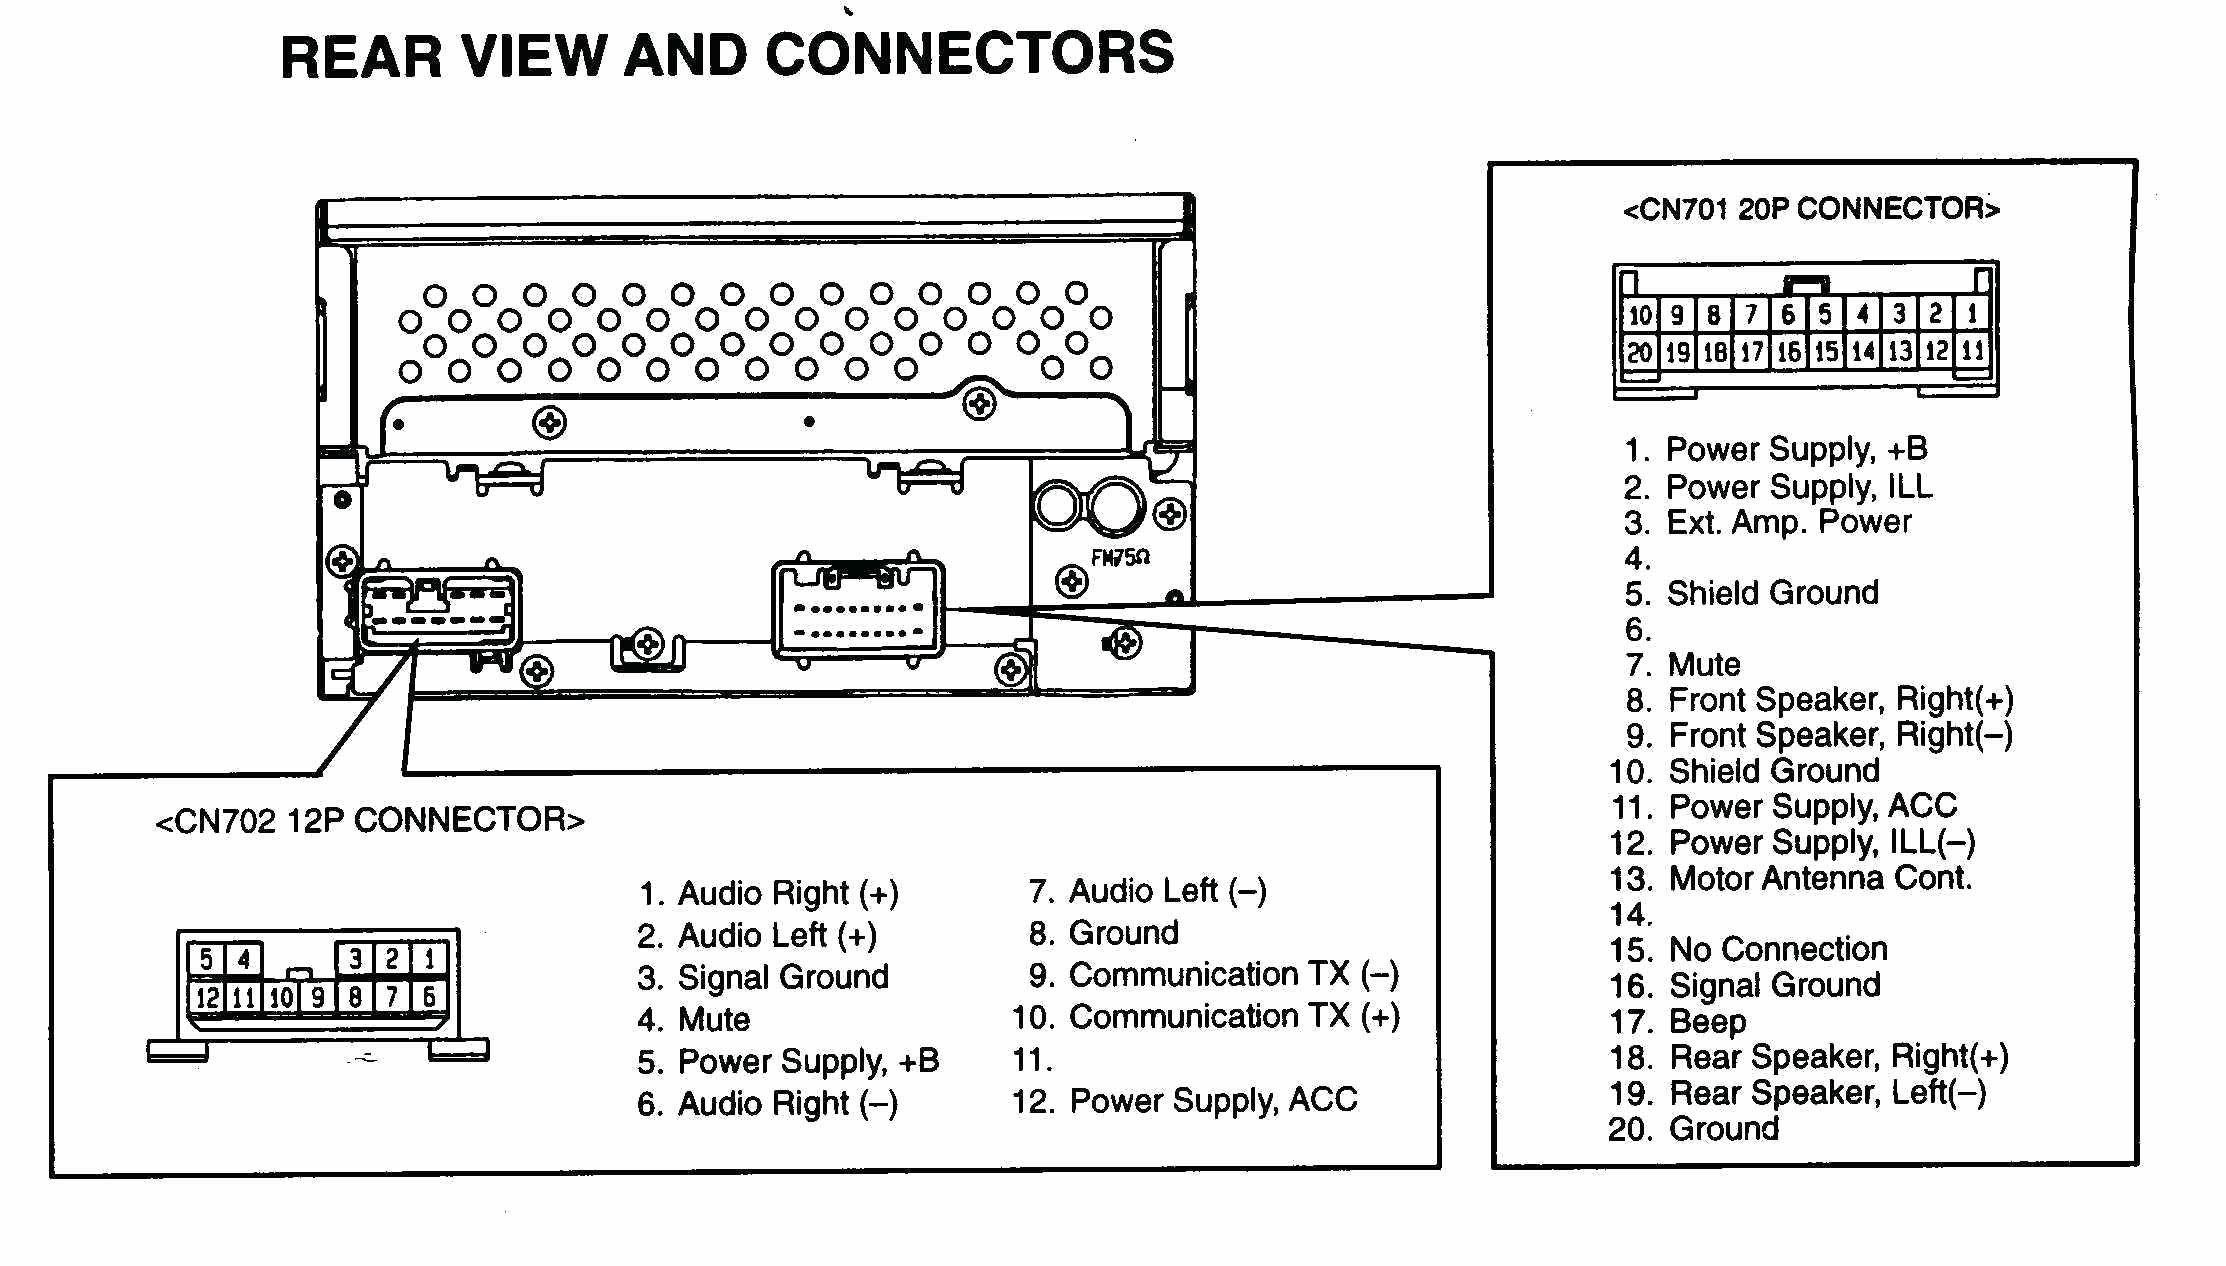 Subaru Legacy Engine Diagram Wiring Diagram for Nest thermostat Page 3 Legacy Radio Harness 1996 Of Subaru Legacy Engine Diagram